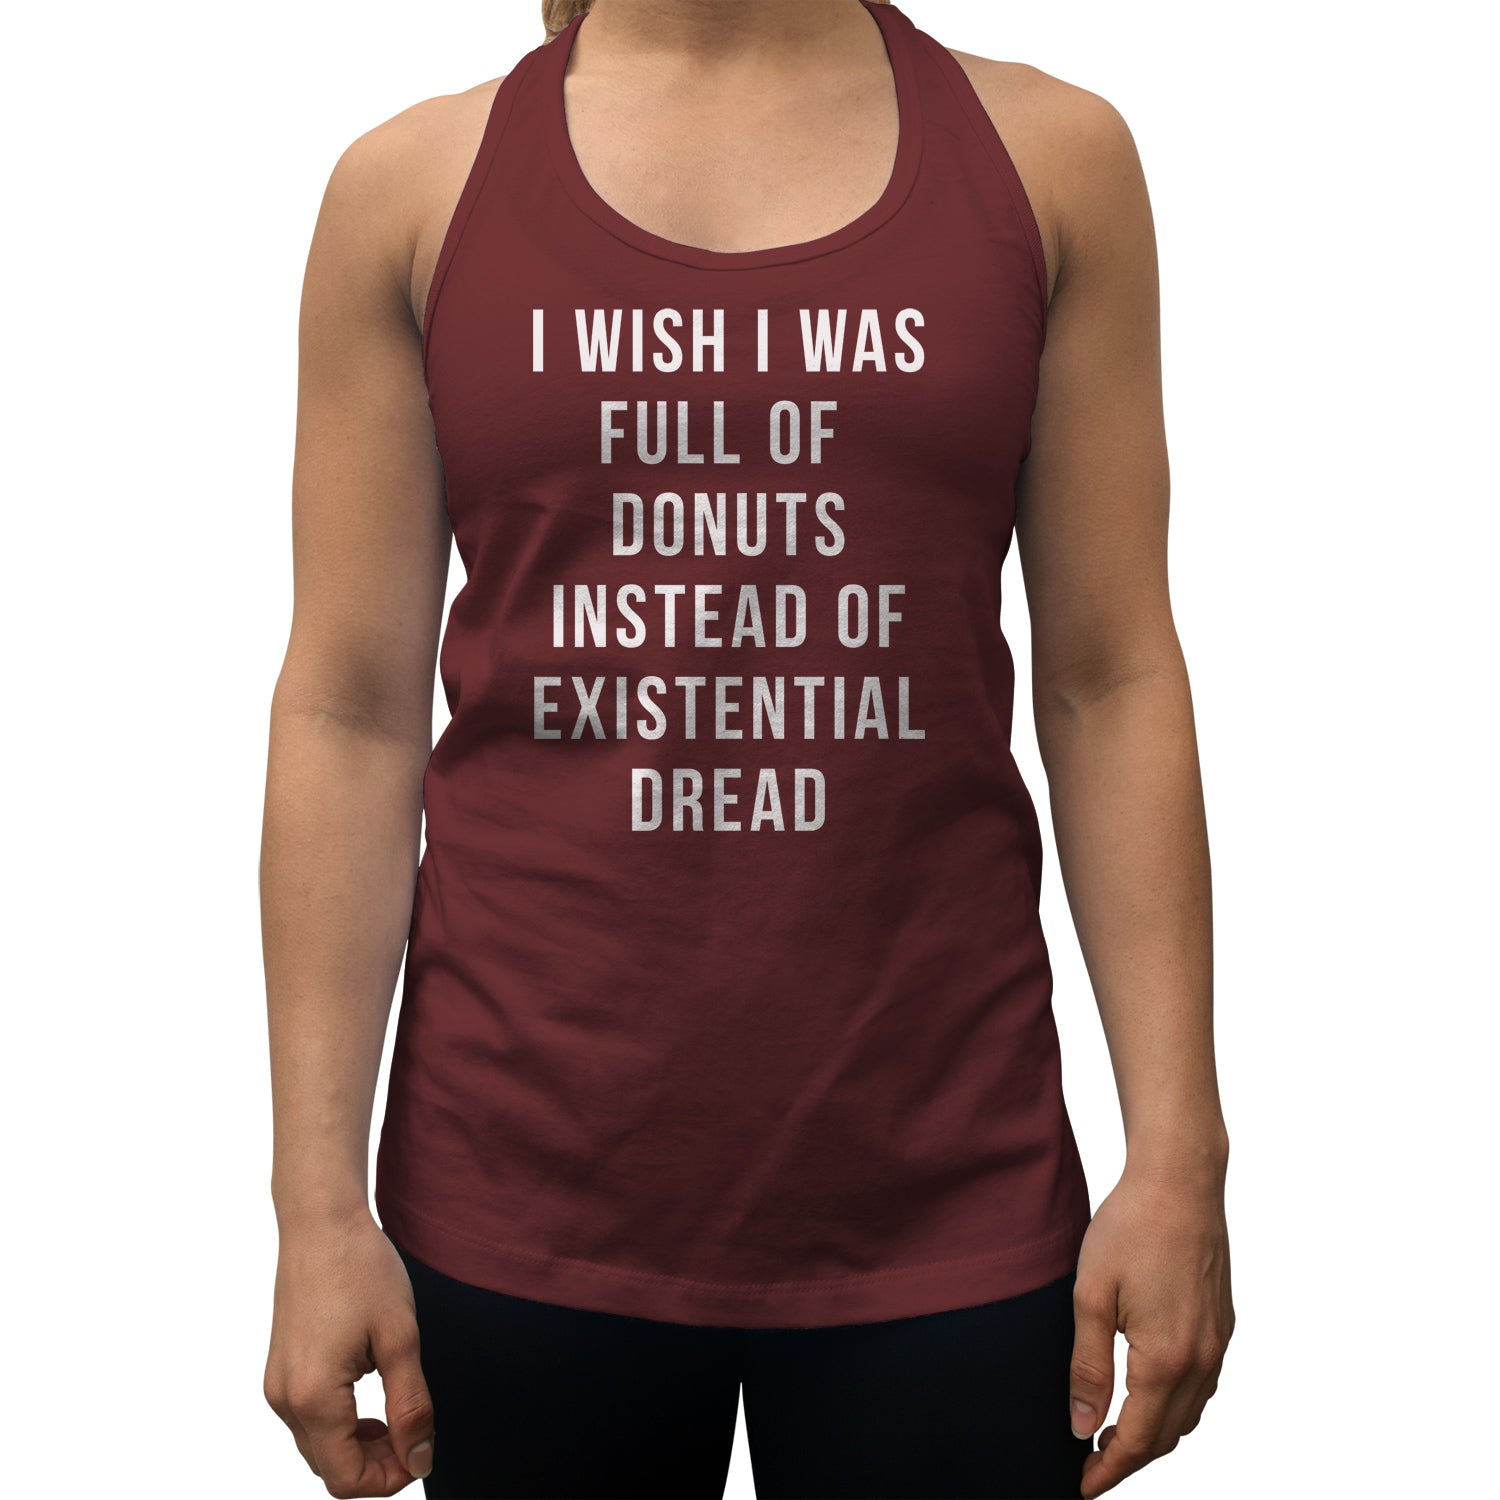 Women's I Wish I Was Full of Donuts Instead of Existential Dread Racerback Tank Top